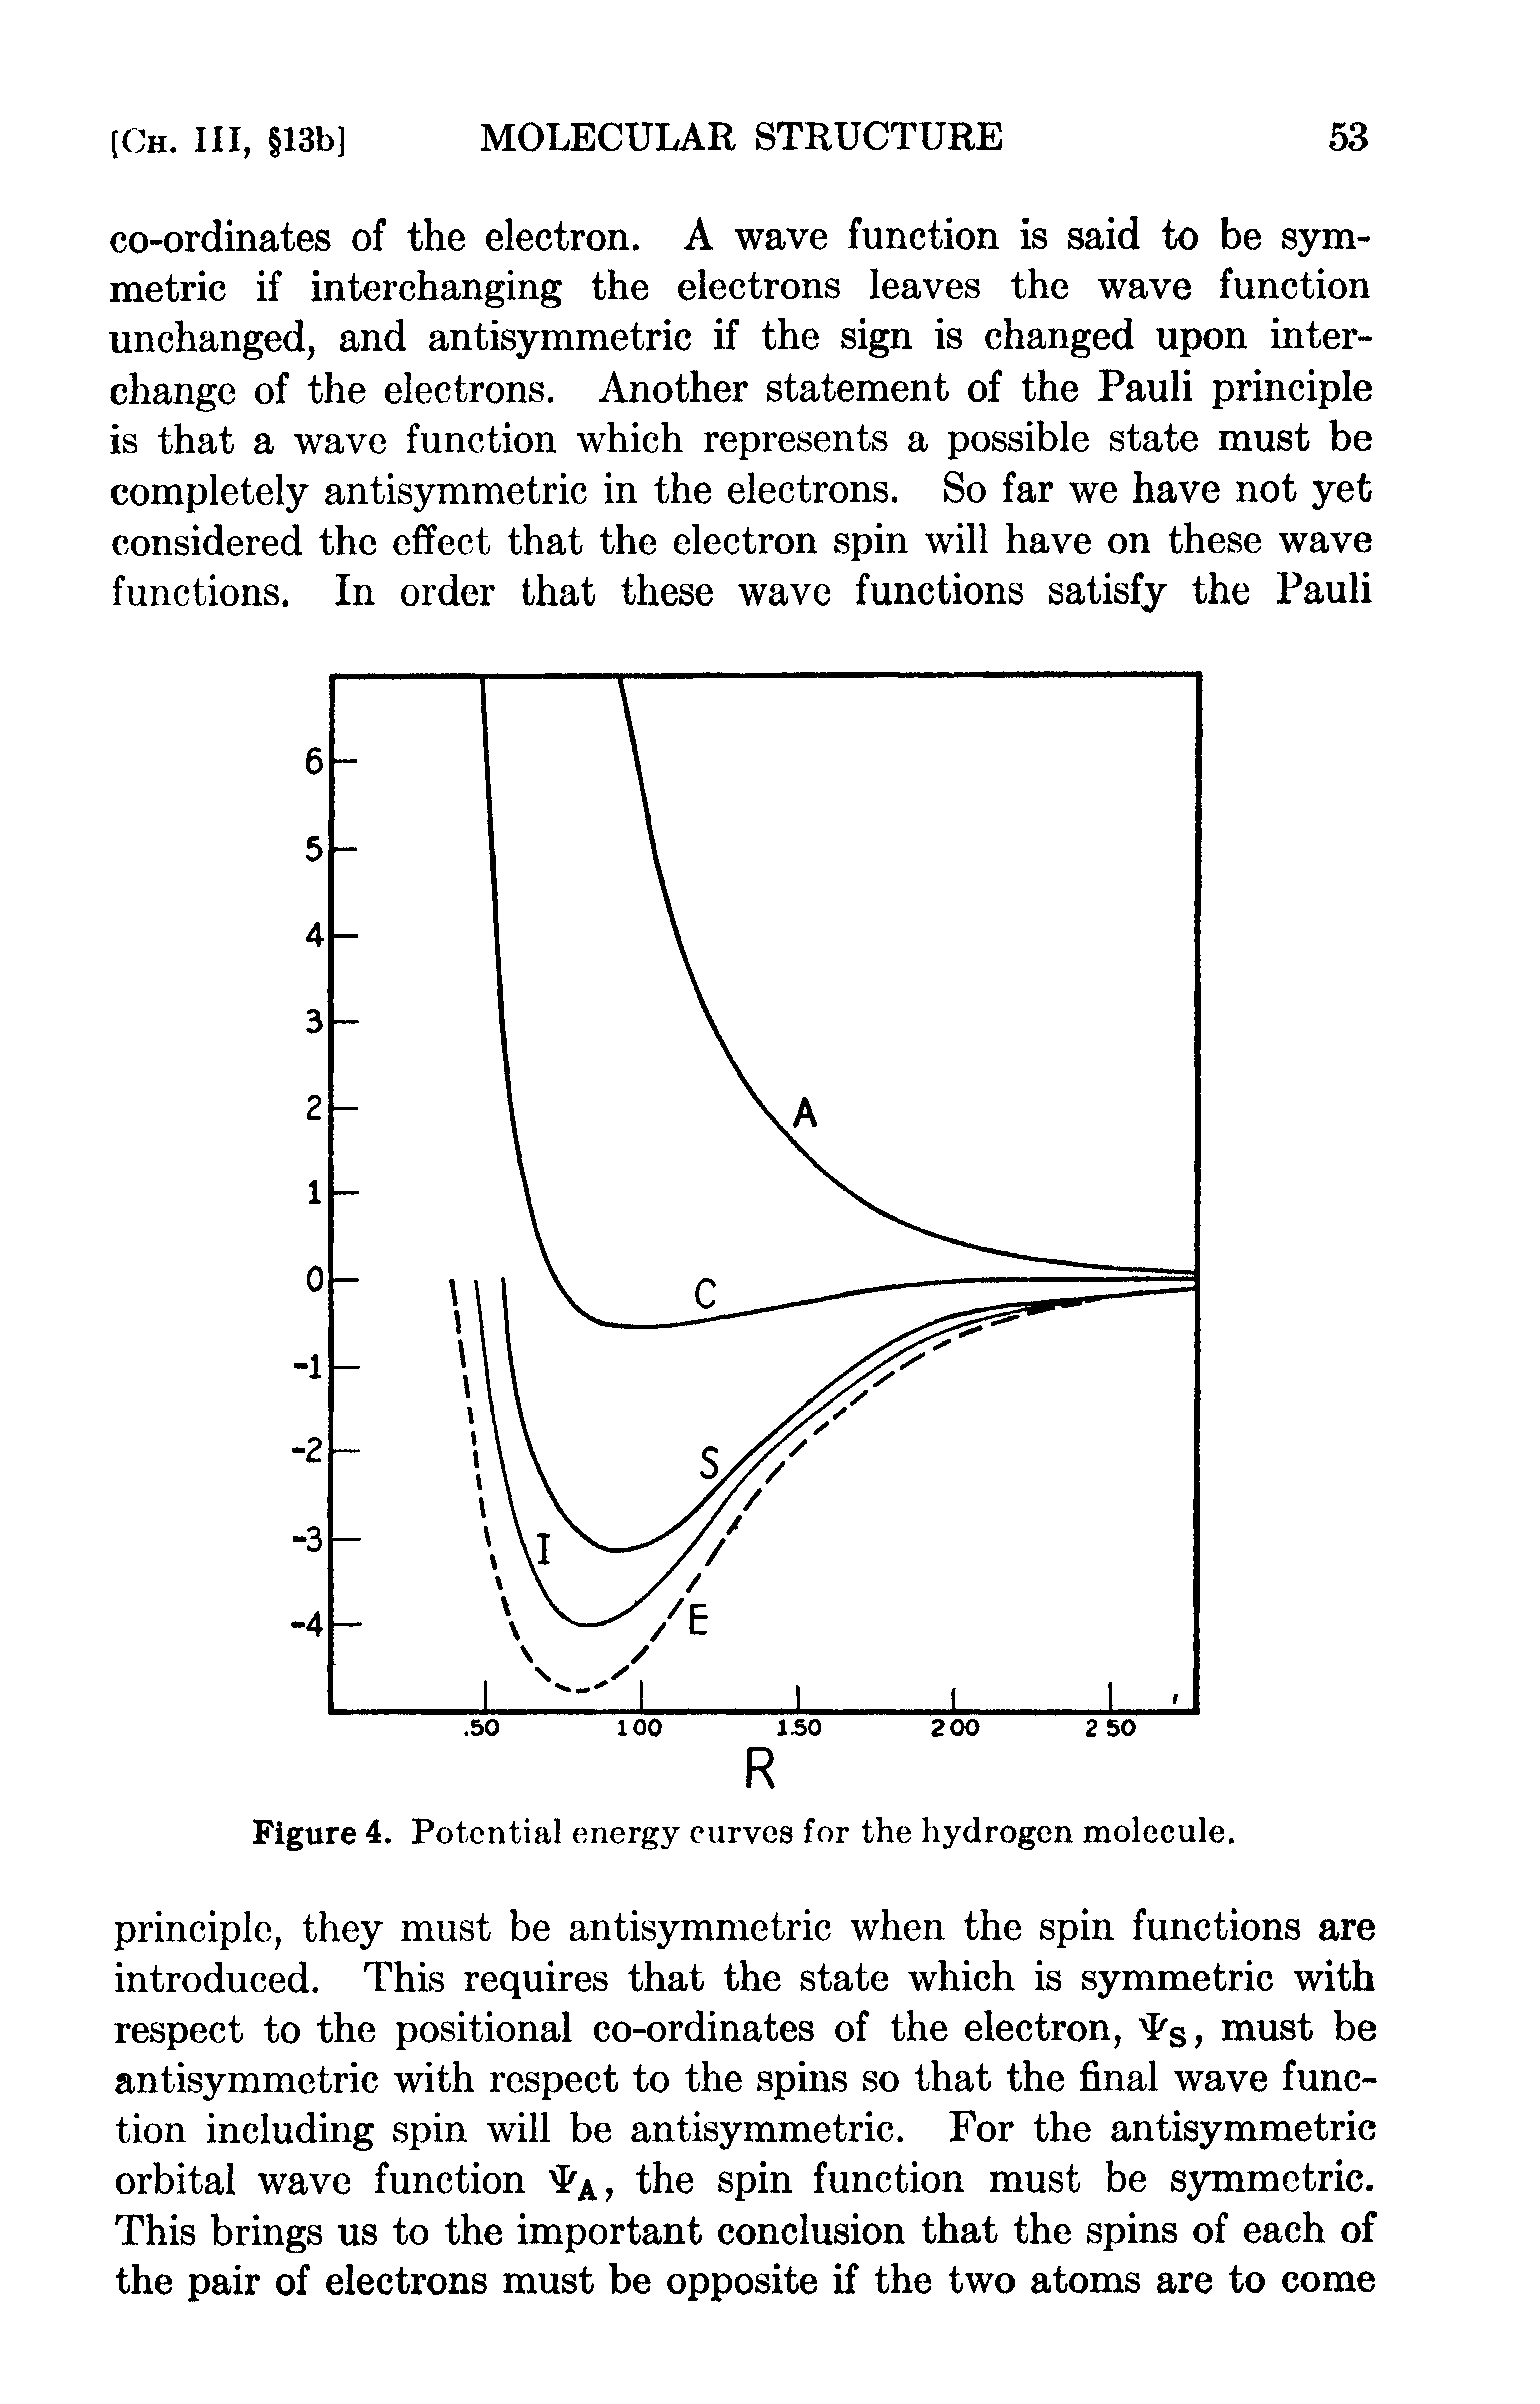 Figure 4. Potential energy curves for the hydrogen molecule...